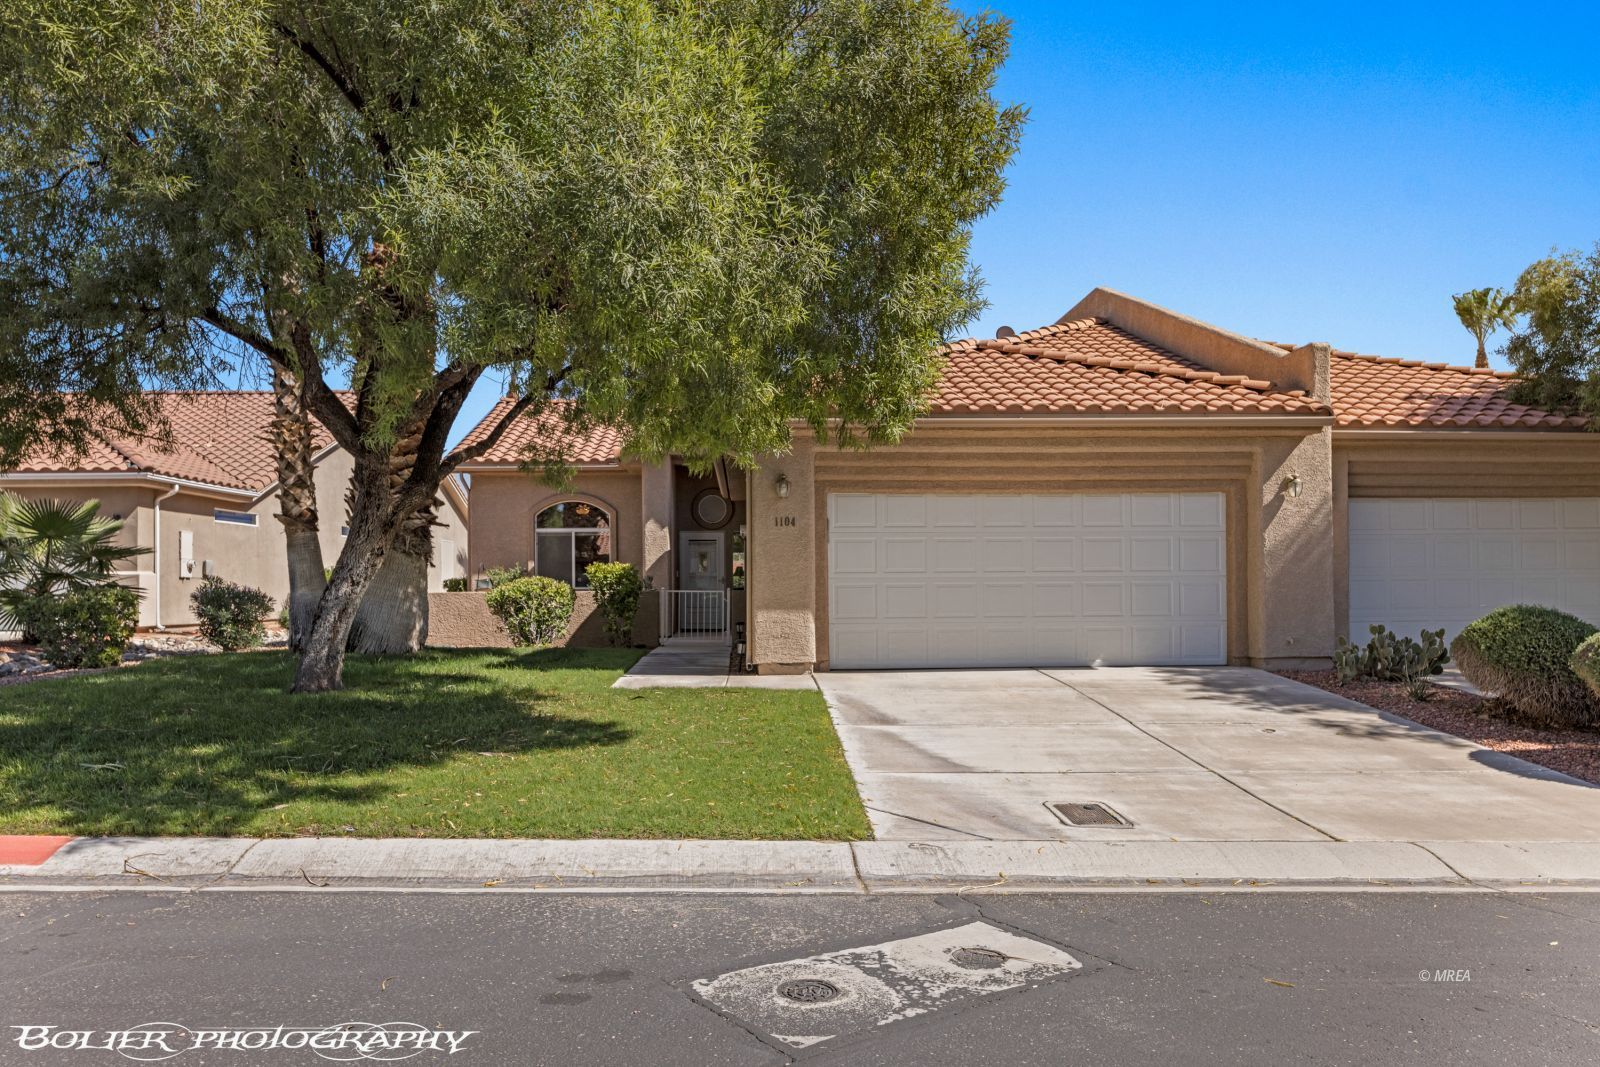 1104 Mohave Dr, Mesquite NV 89027